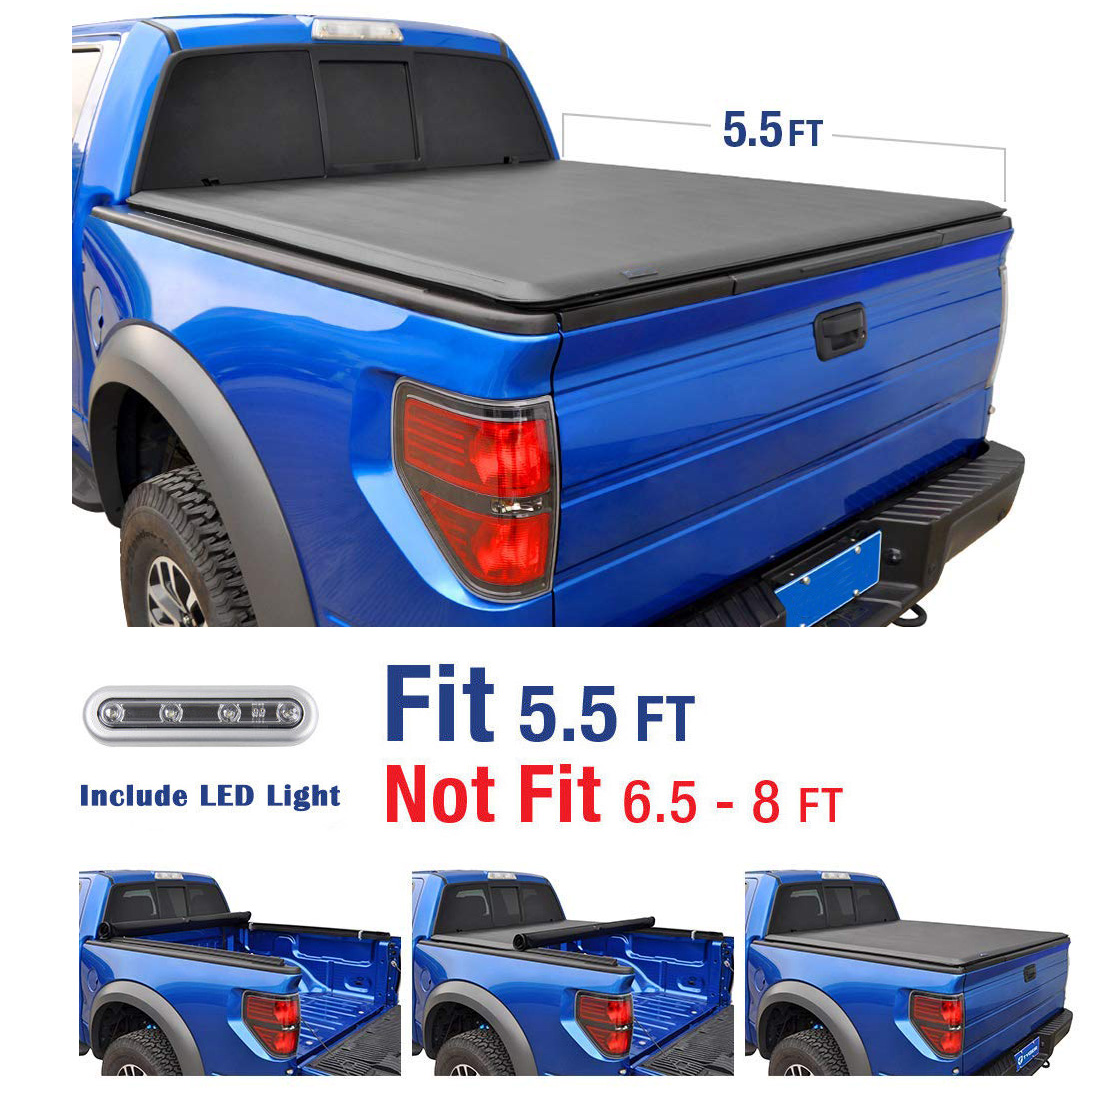 OSIAS 5.5' Short Bed Roll Up Soft Tonneau Cover For 2009-2018 Ford F-150